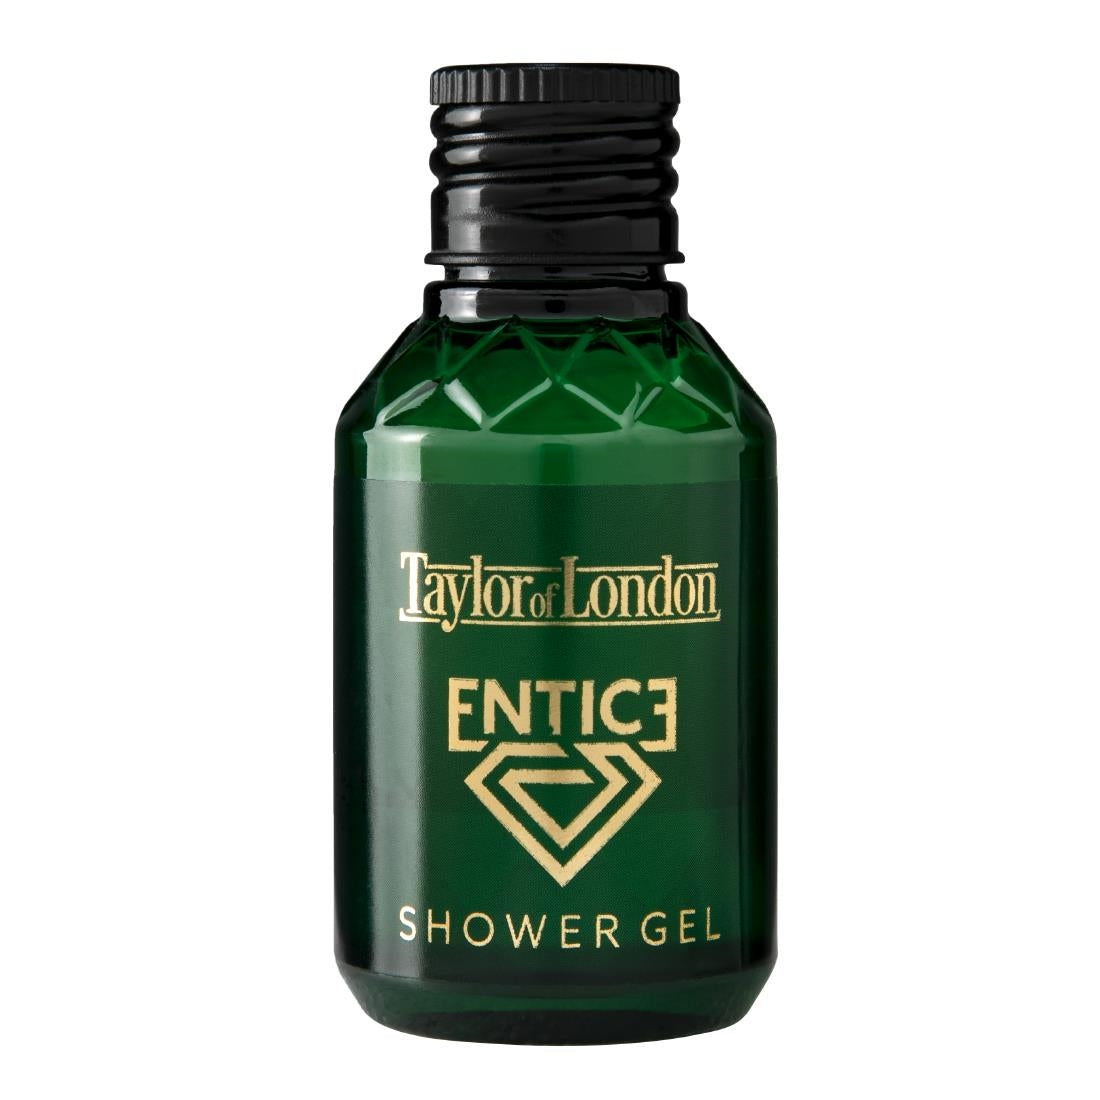 CU231 Taylor of London Entice Shower Gel 50ml (Pack of 43) JD Catering Equipment Solutions Ltd